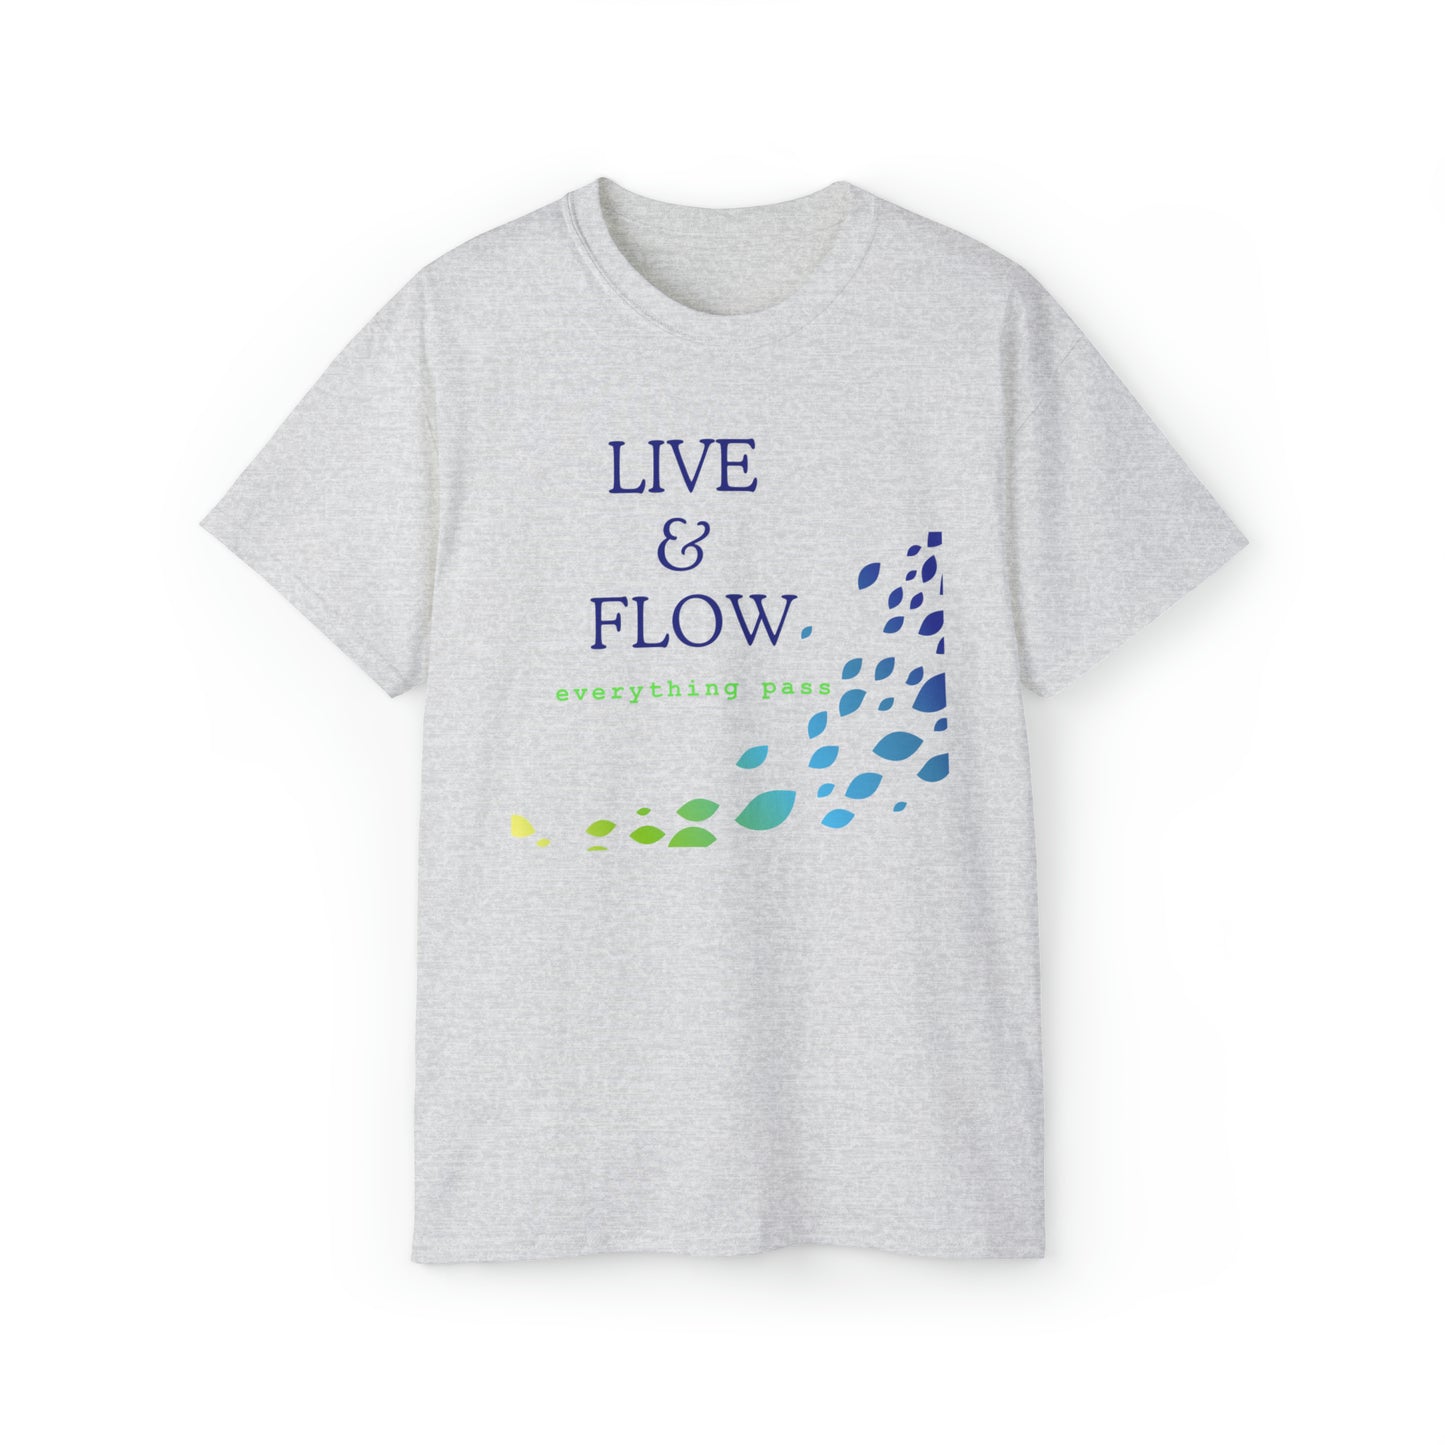 Unisex Ultra Cotton Tee - Life is motion - Live & Flow "everything pass"